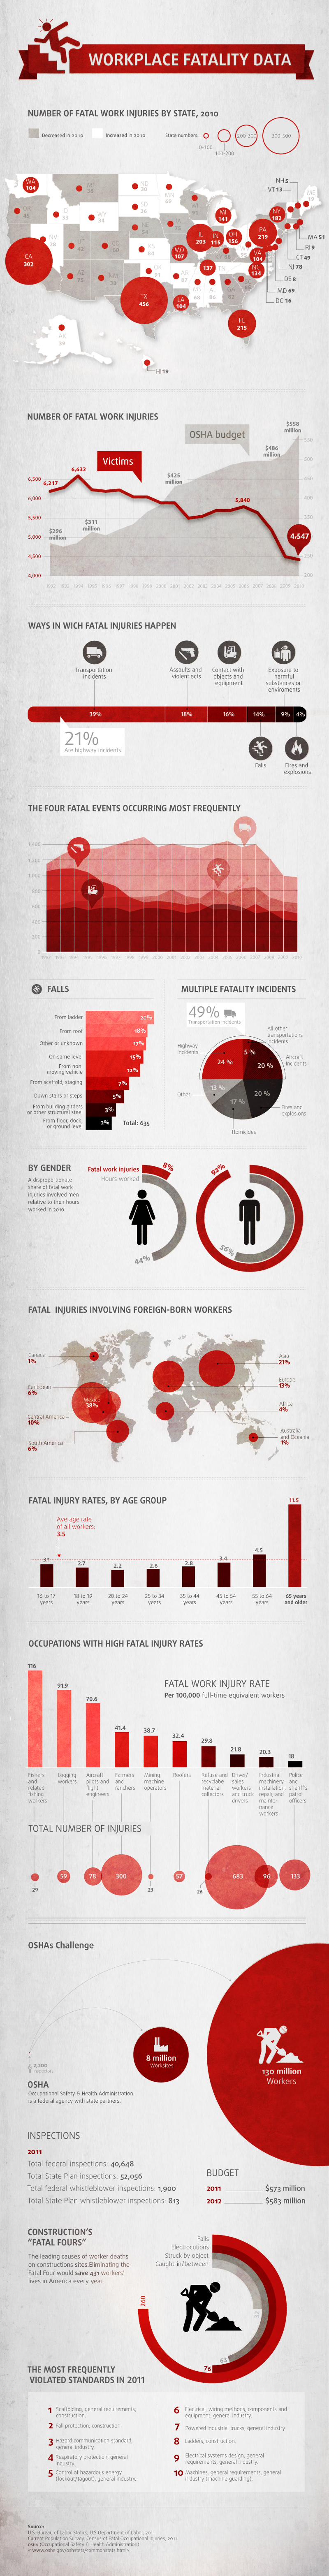 InfoGraphic on Workplace Fatality Data (US),